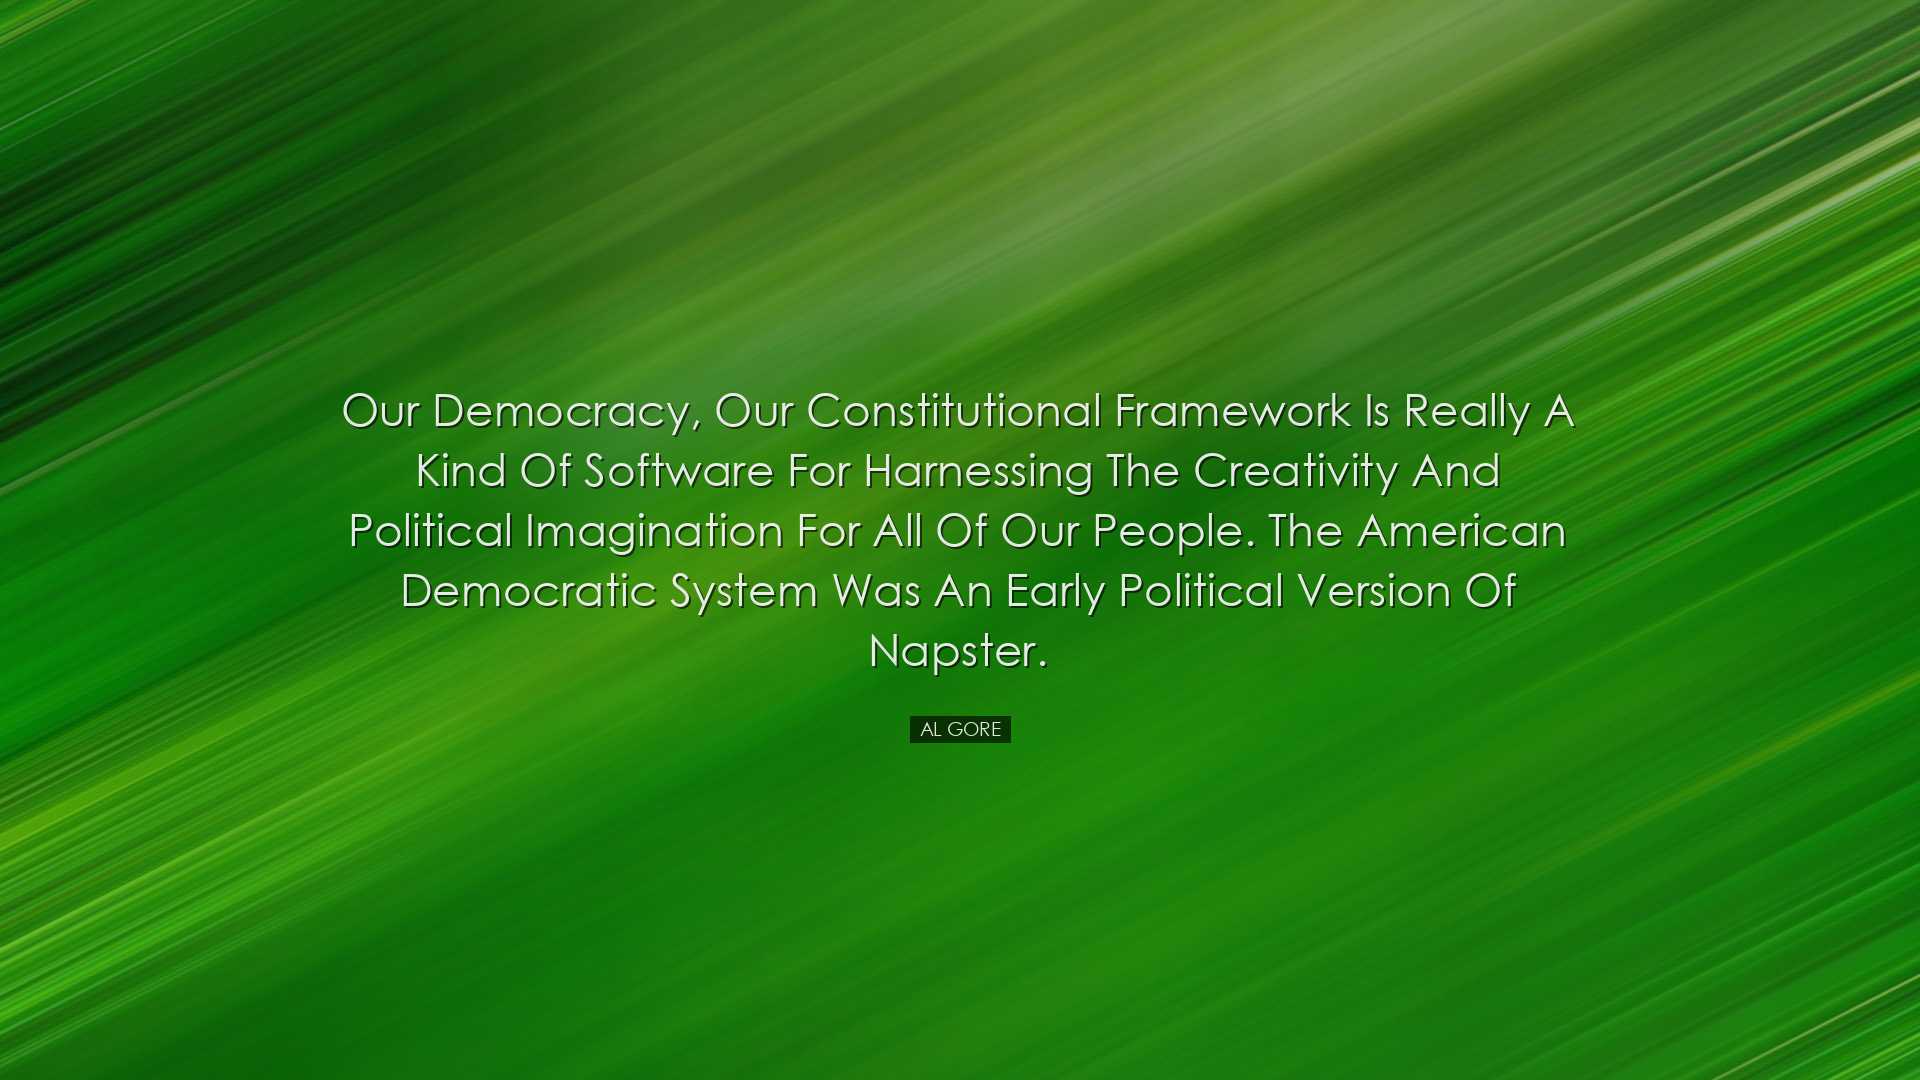 Our democracy, our constitutional framework is really a kind of so